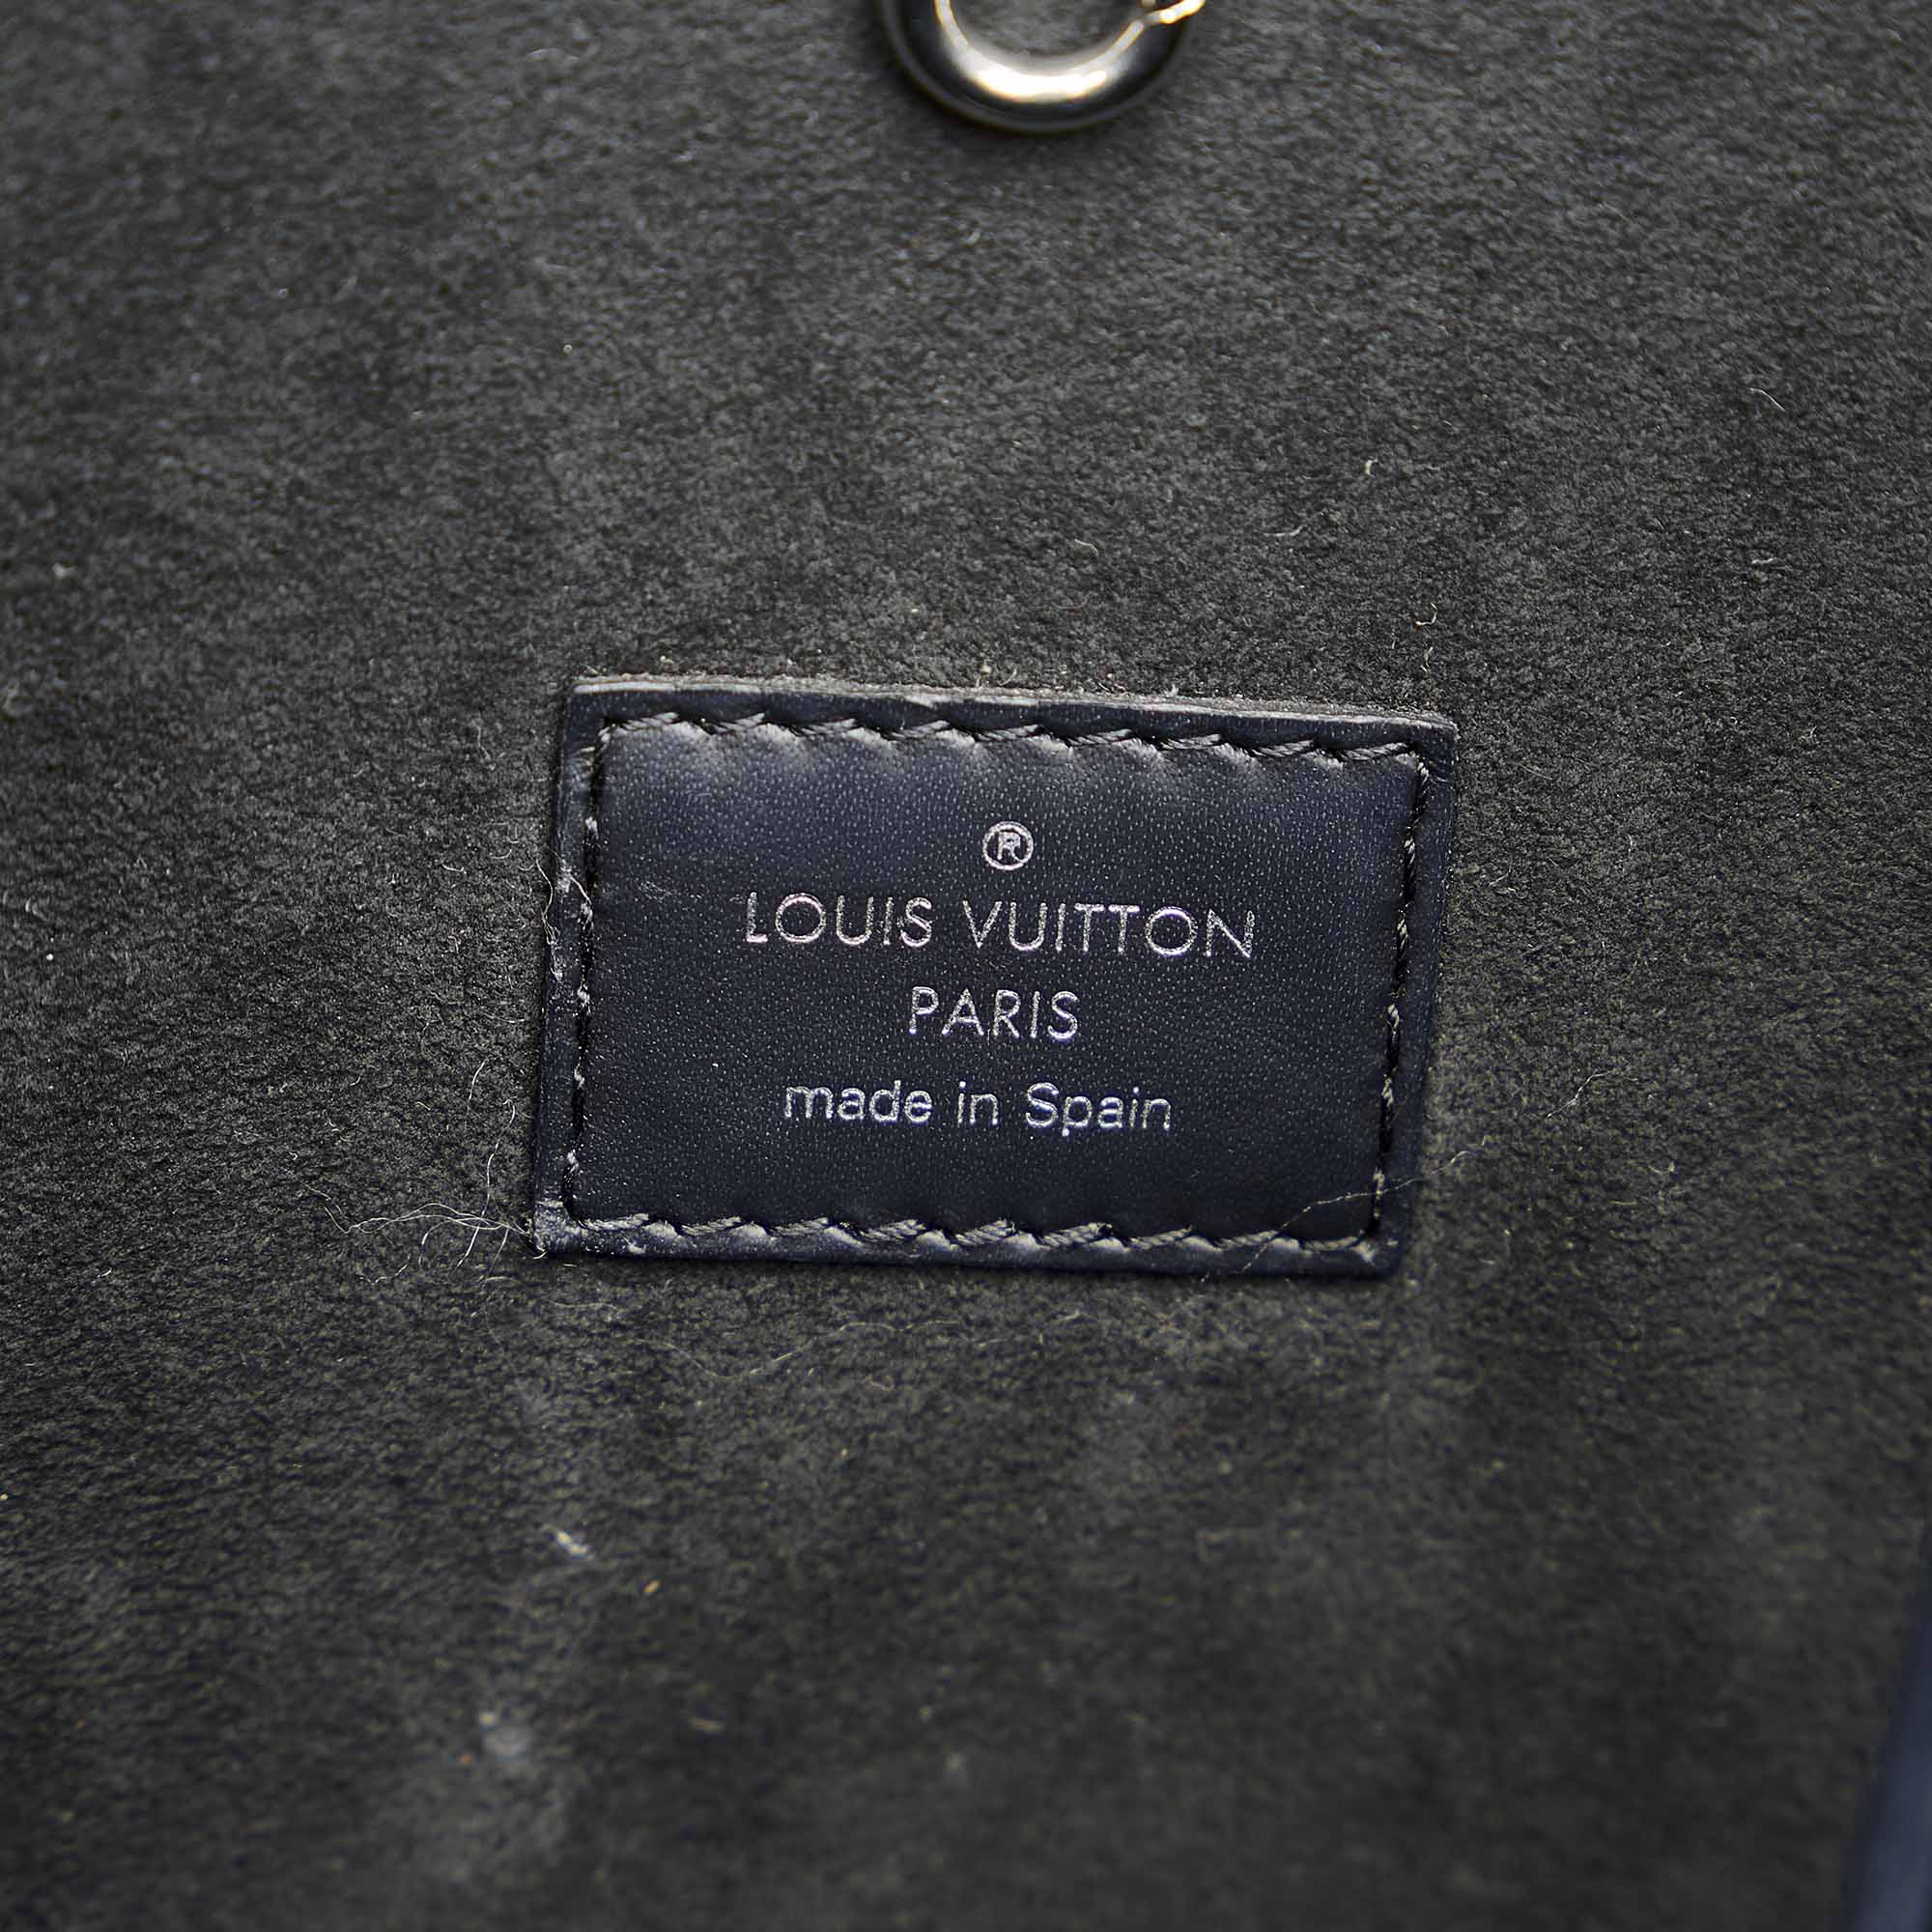 Louis Vuitton Navy Blue Epi Leather Neverfull MM Tote Bag 280lvs512